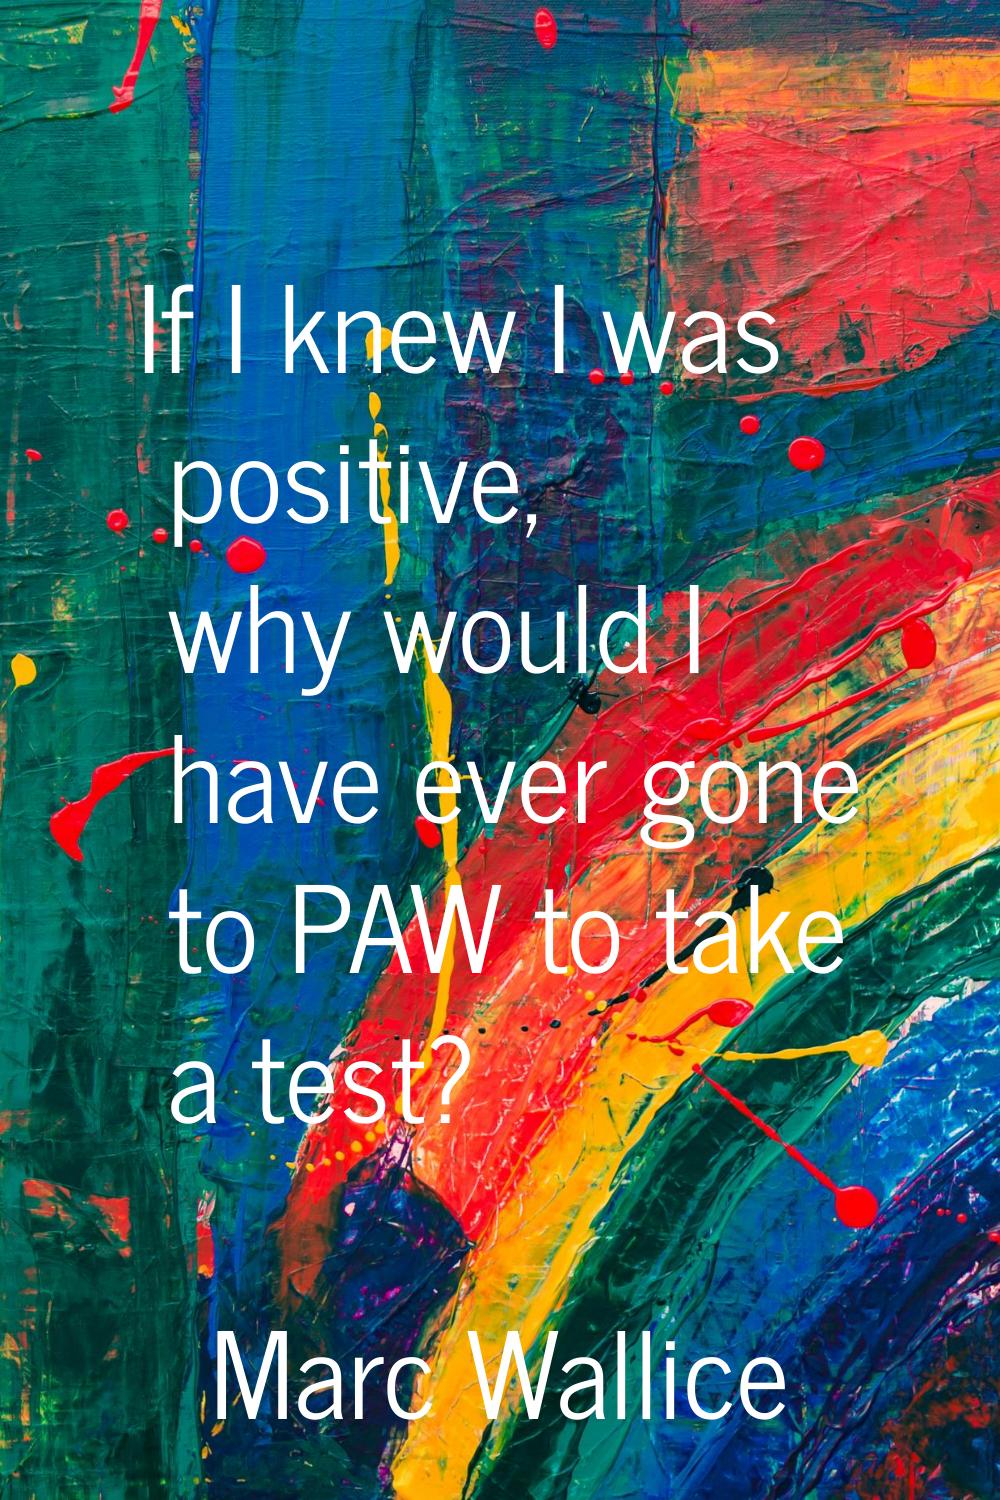 If I knew I was positive, why would I have ever gone to PAW to take a test?